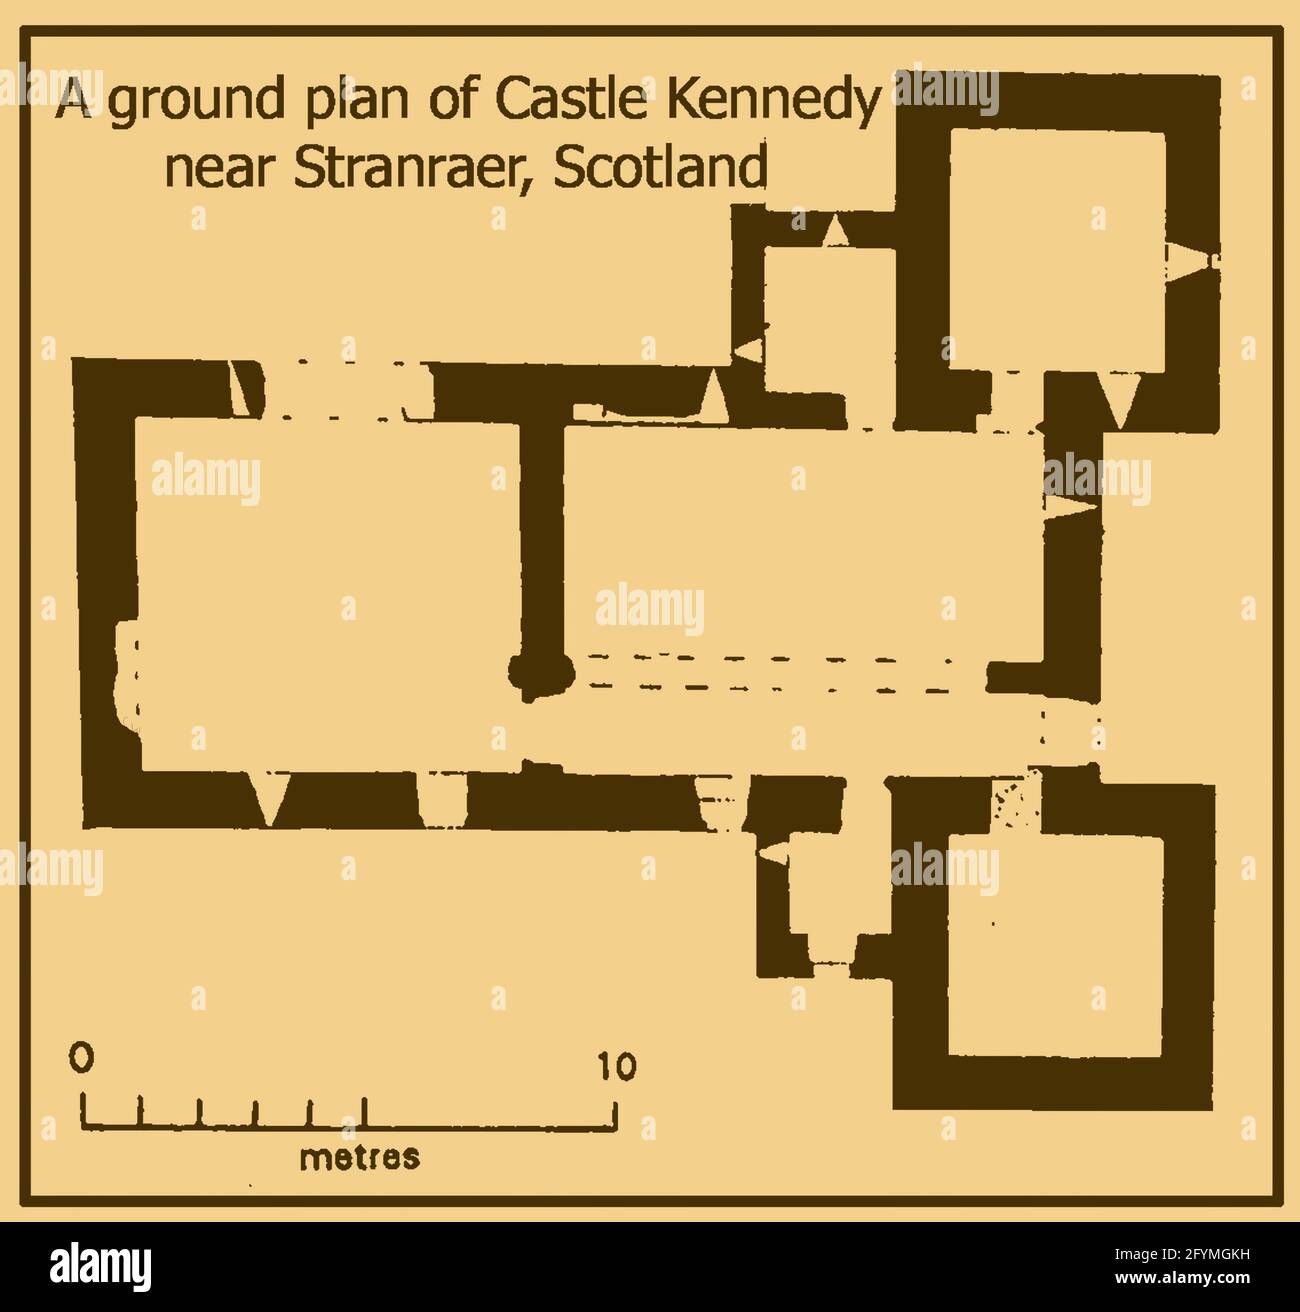 Castle Kennedy Gardens & Gardens, Dumfries & Galloway, Scotland in 2021 - A ground floor plan of  the ruined old castle  built in 1607 as a mansion house by the Earl of Cassilis, on the site of the original medieval castle. Bought by  Sir John Dalrymple, in 1677 it later became the home of the  Earl of Stair  but  was destroyed by fire in 1716 and never rebuilt. The  ancient scheduled monument, stands on the hill in the centre of the 'island' (isthmus) with   White and Black Lochs at each side. The medieval structure   was used for scenes in the original  British version of the Wickerman film. Stock Photo